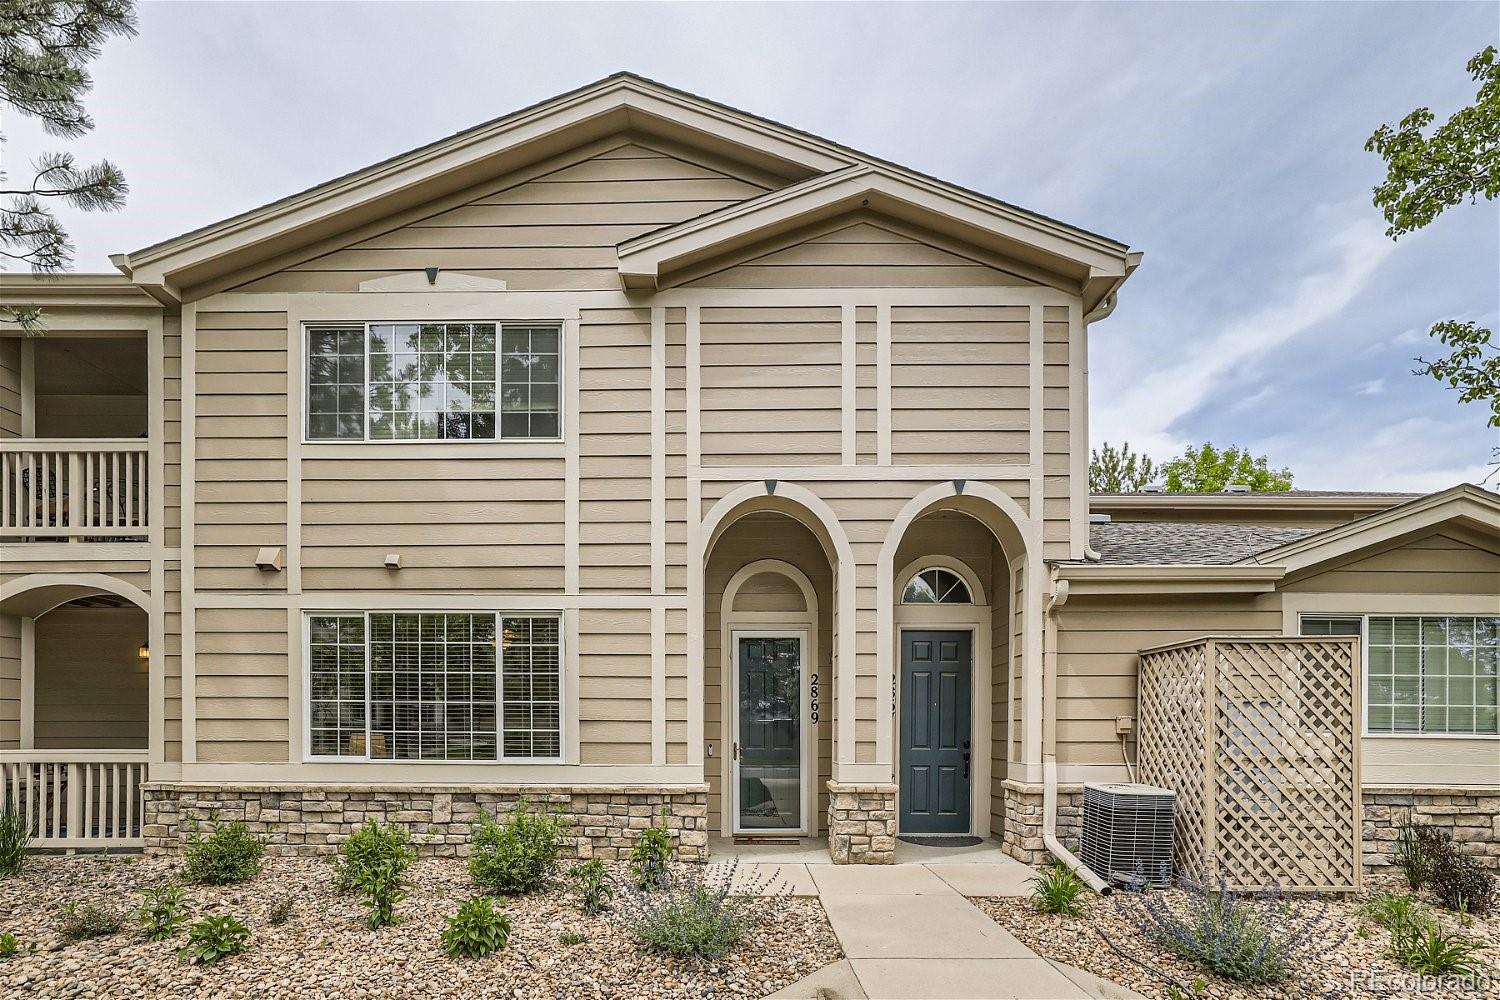 Report Image for 2869  Whitetail Circle,Lafayette, Colorado